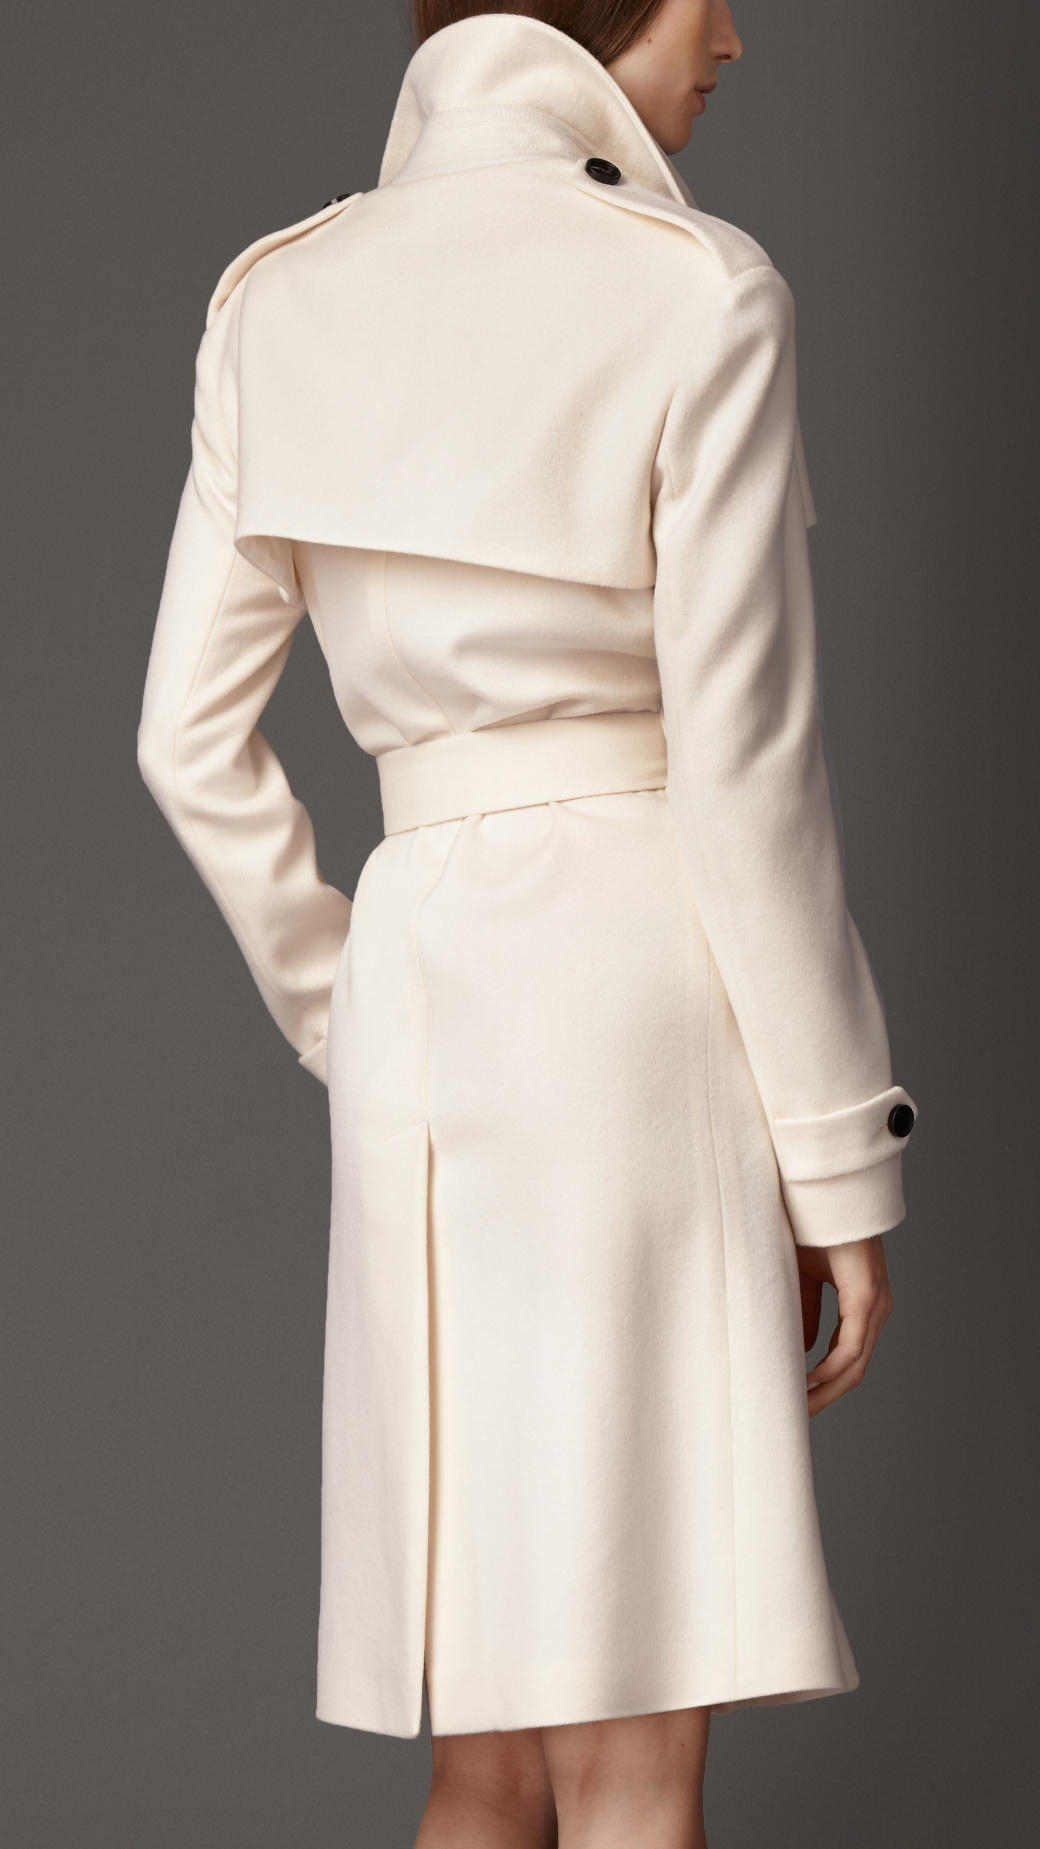 Lyst - Burberry Long Double Cashmere Trench Coat in White